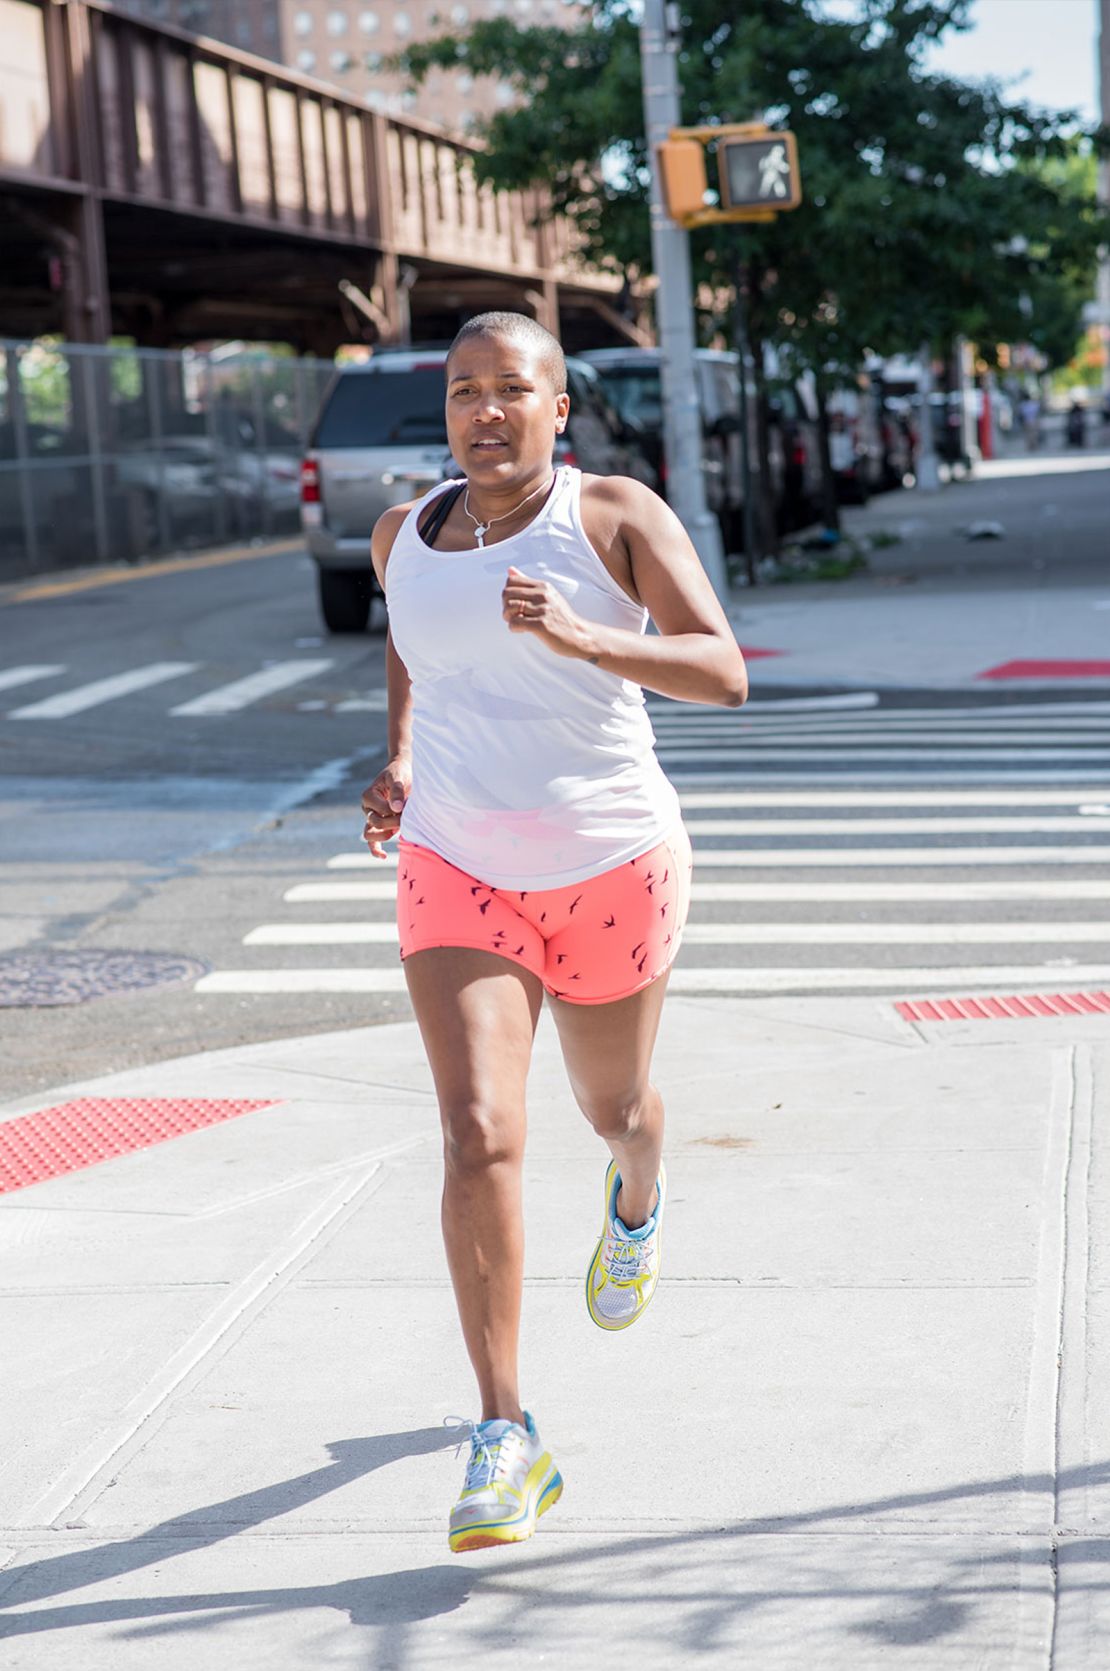 Alison Désir founded several running groups that seek to empower  women through fitness.